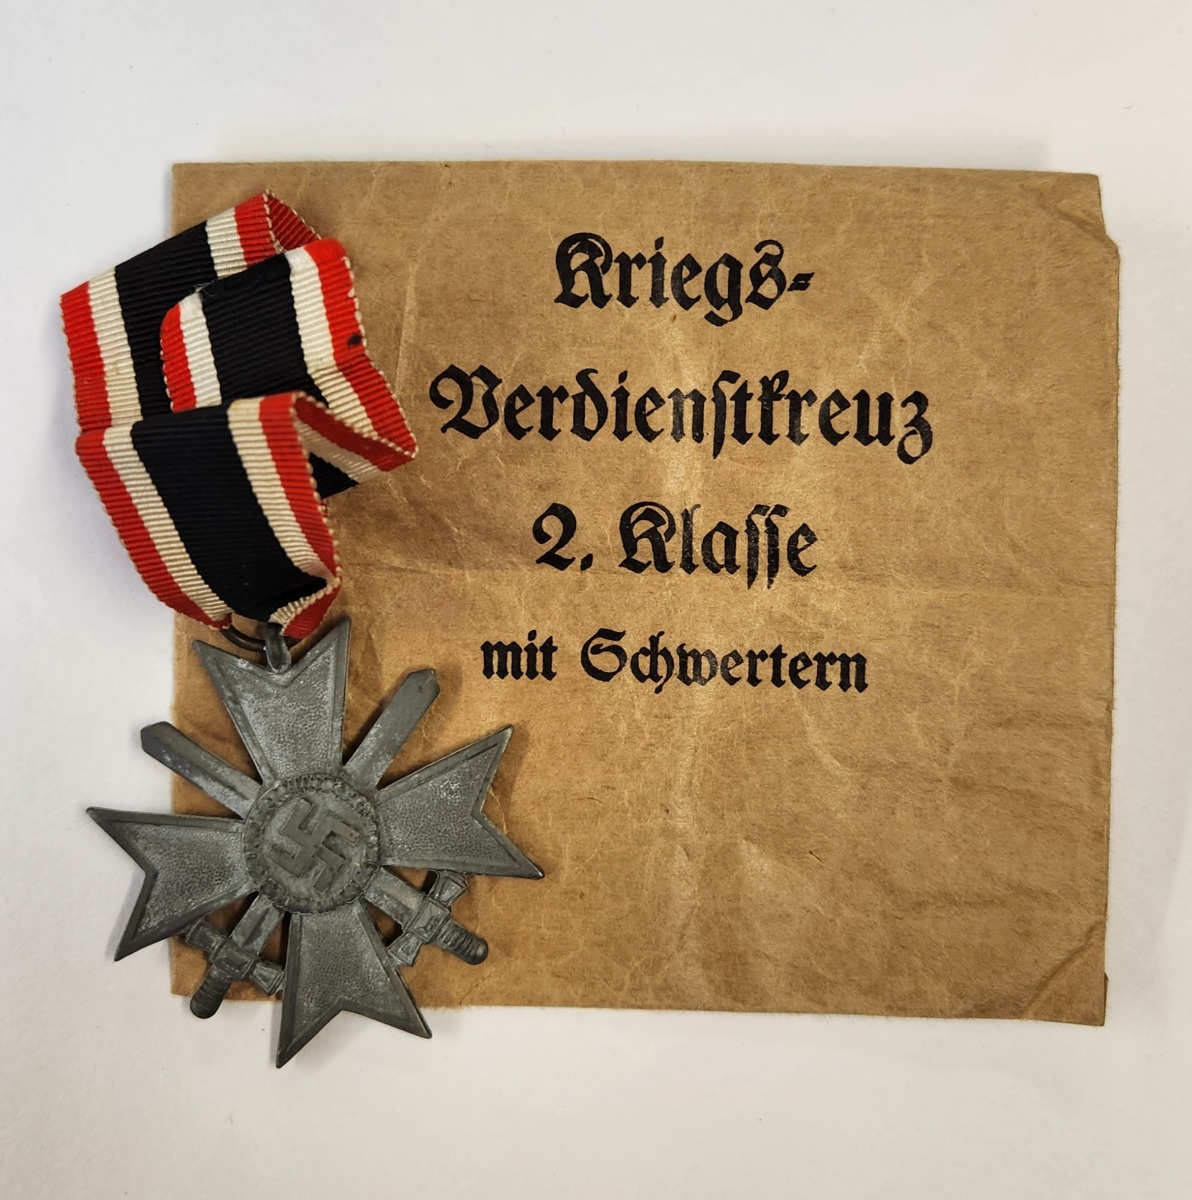 GERMAN WAR MERIT CROSS 2ND CLASS WITH SWORDS AND ISSUE ENVELOPE ORIGINAL